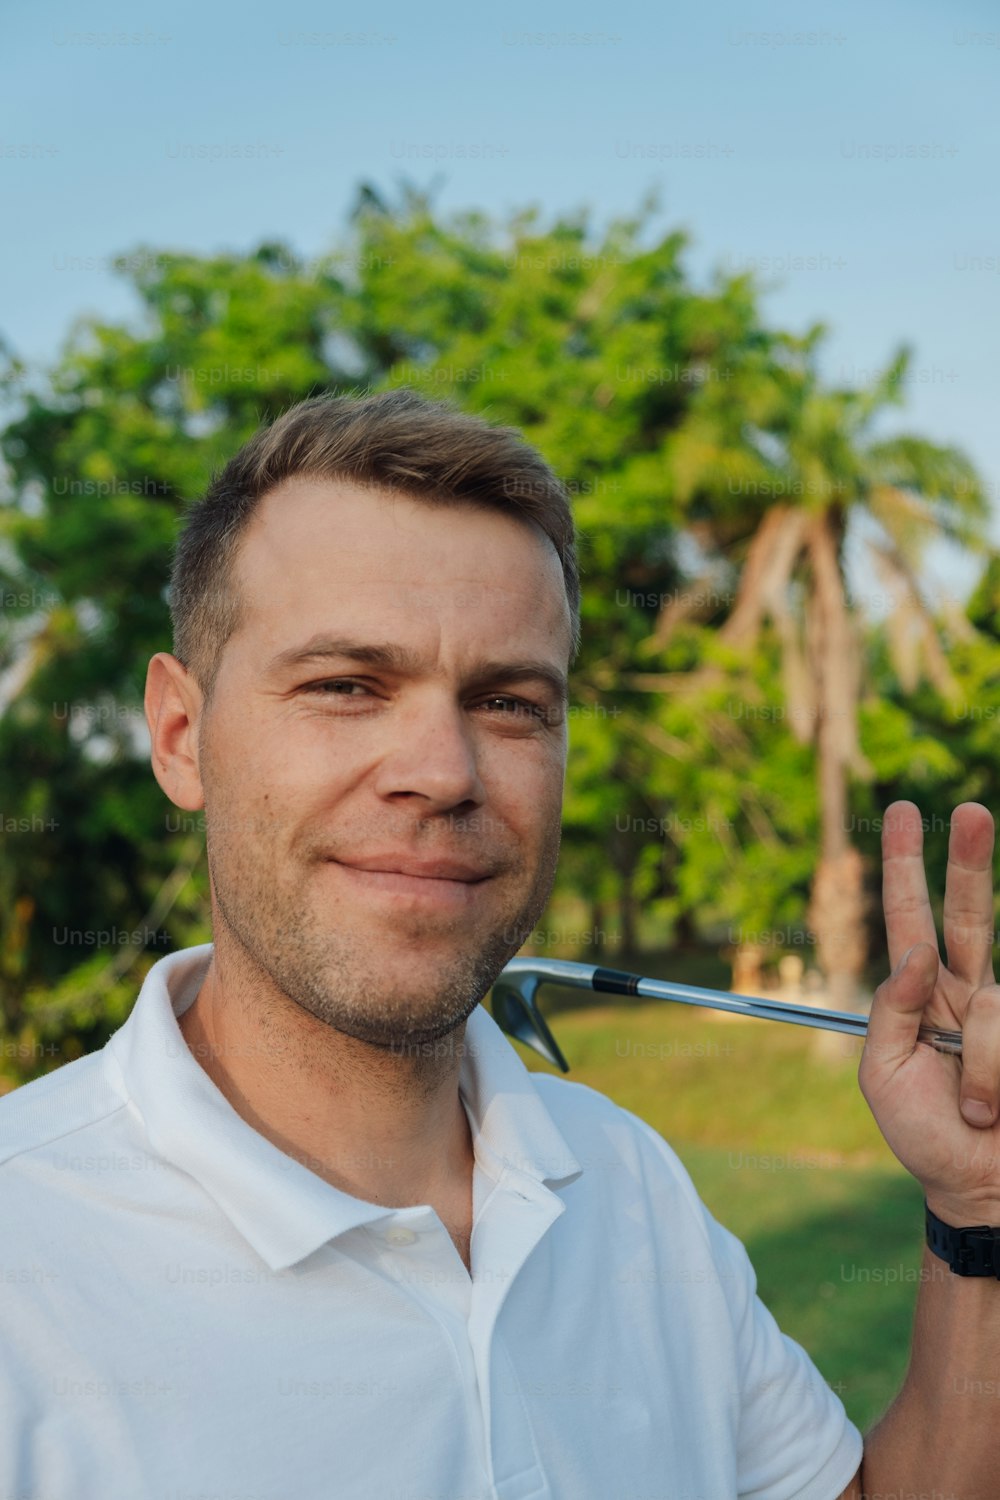 a man holding a golf club in his hand